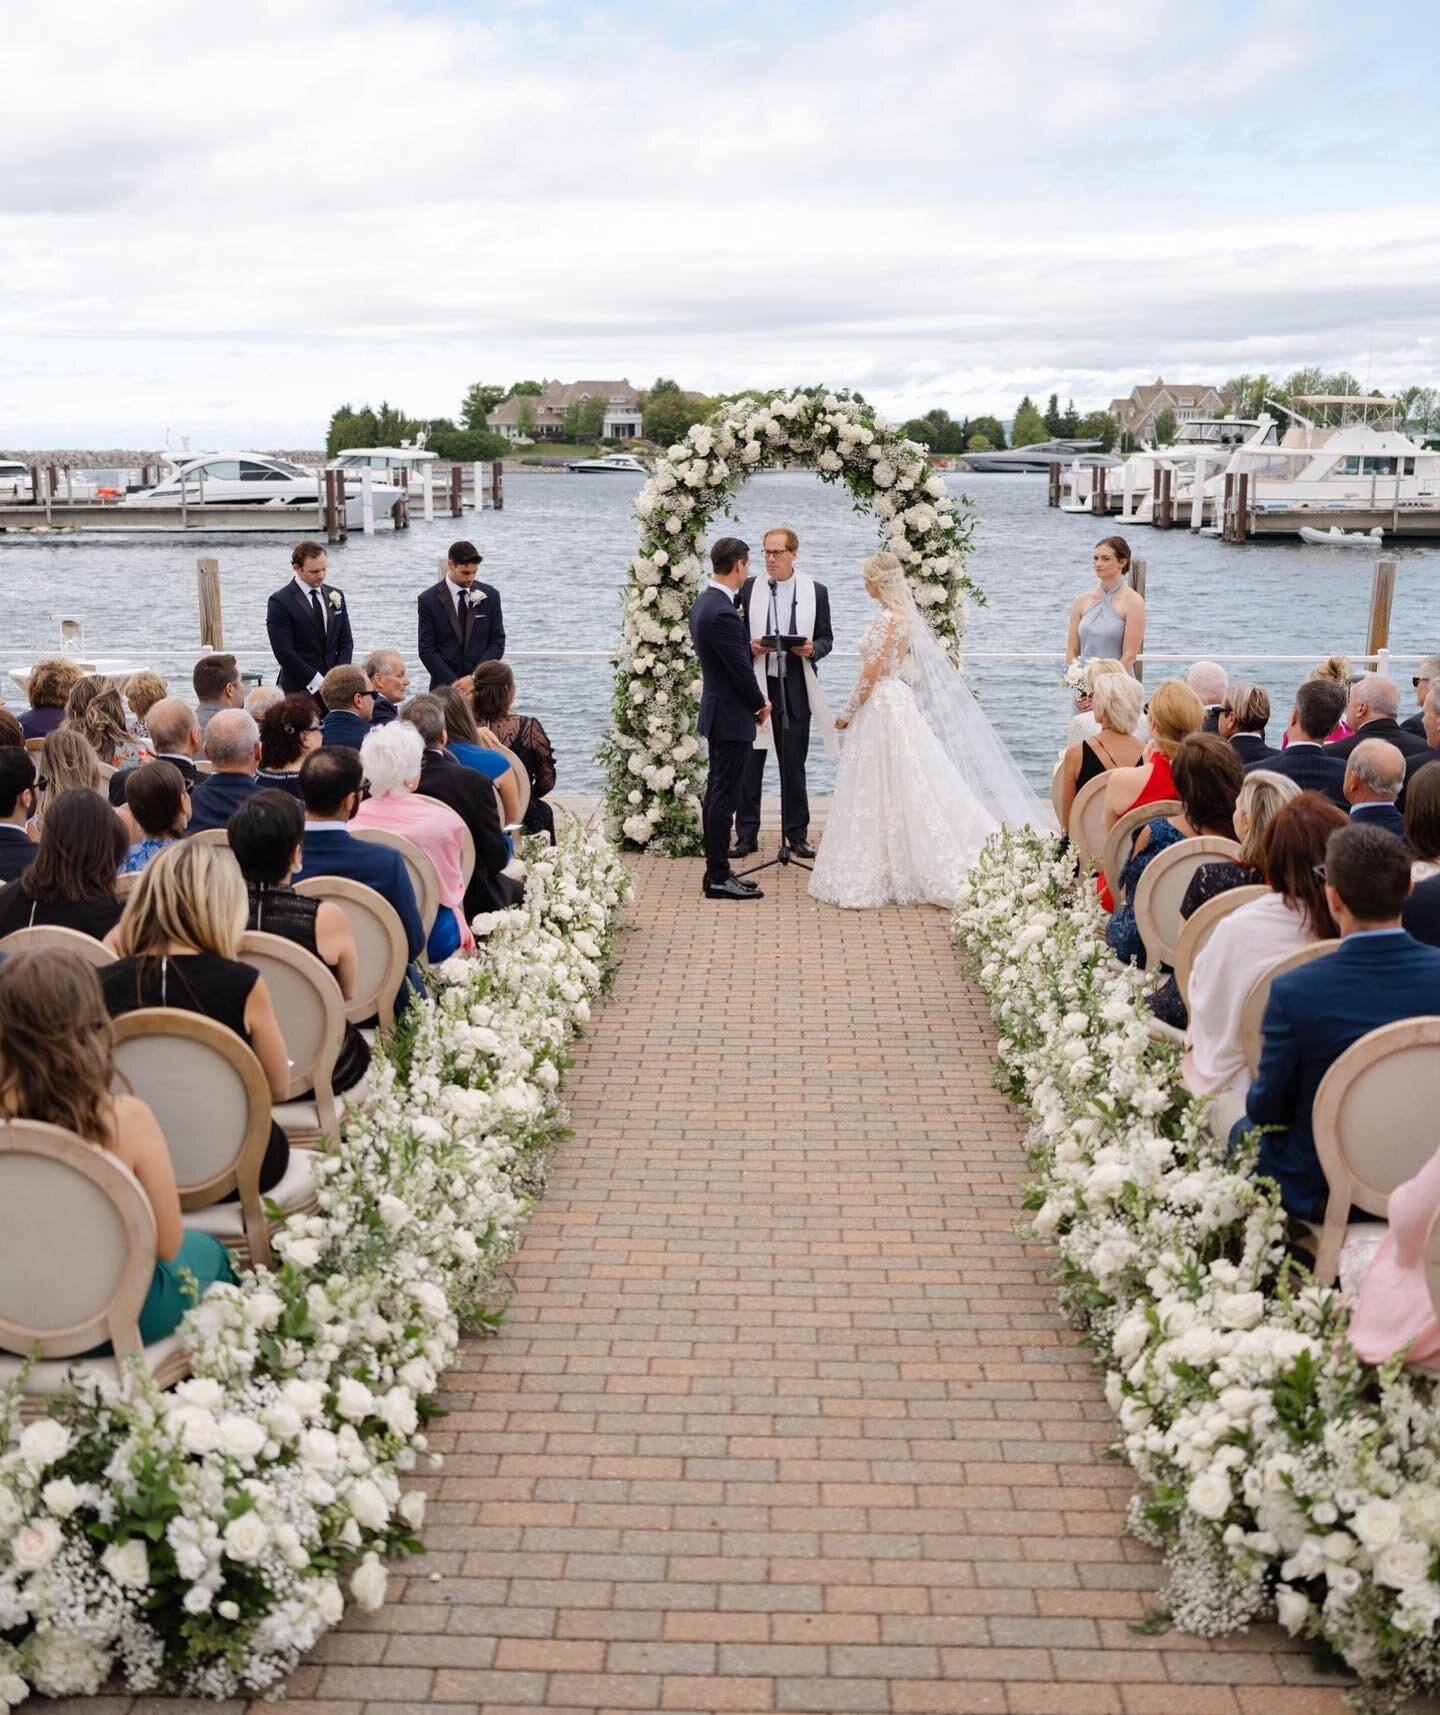 One of a kind ceremony location at Bay Harbor Yacht Club.